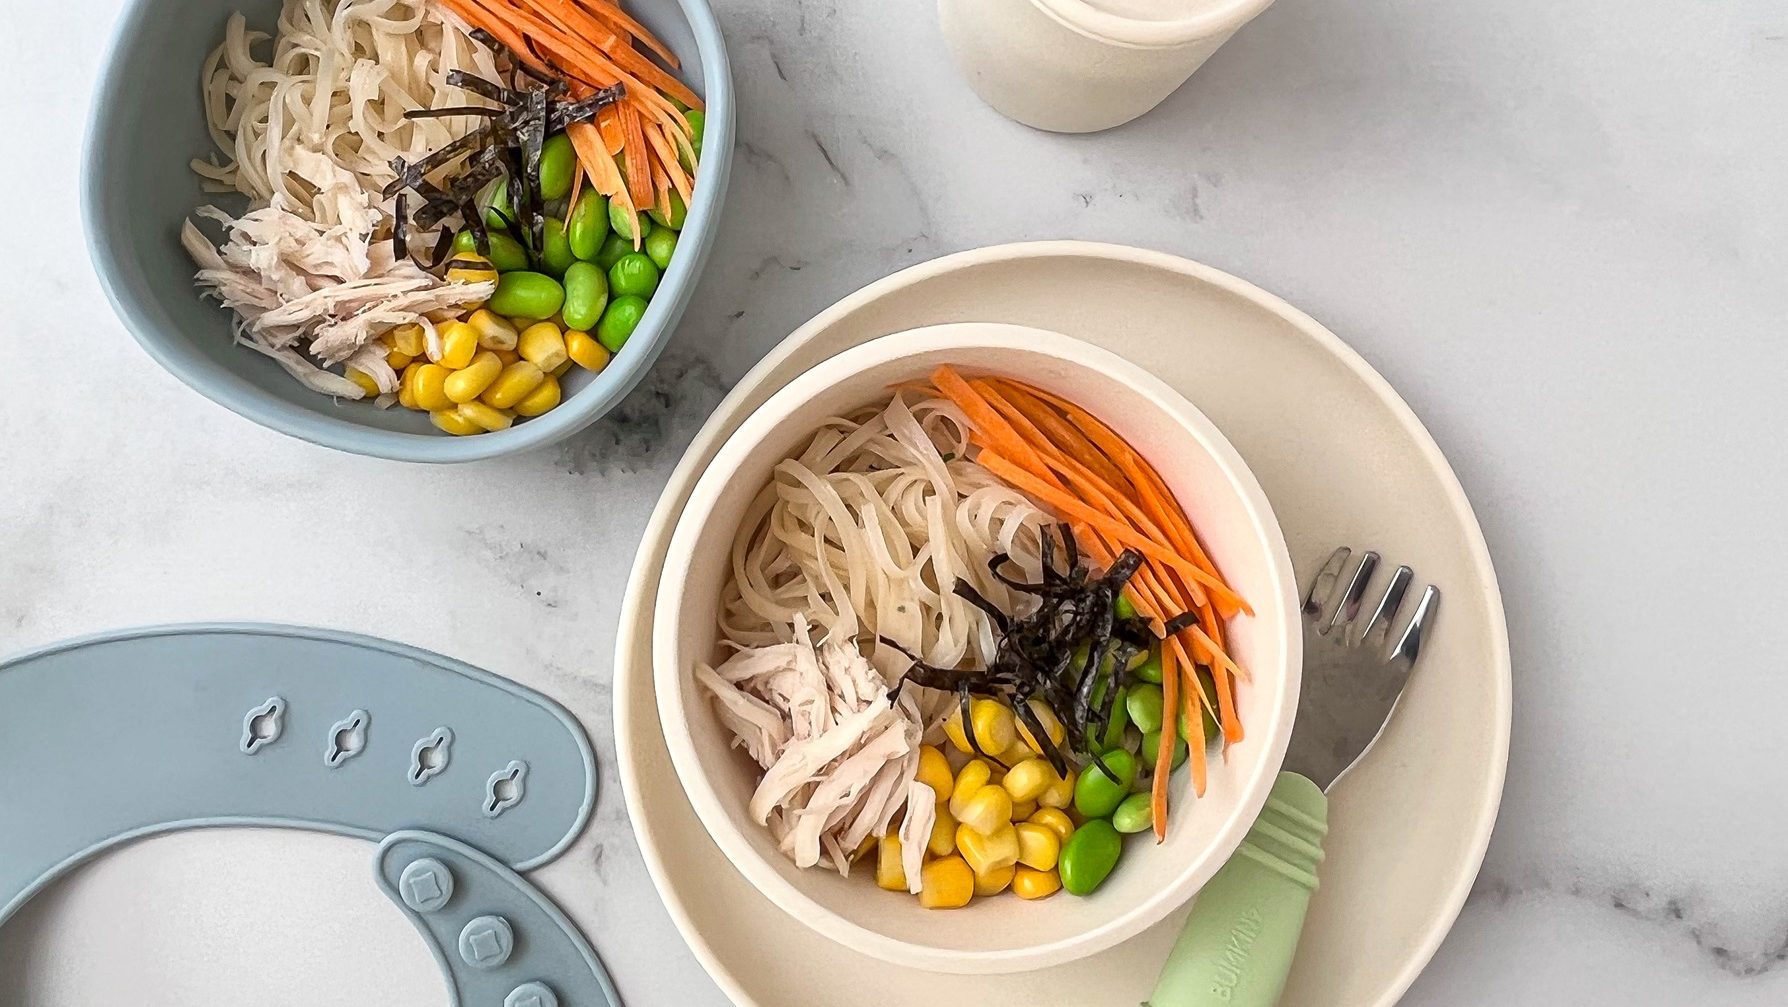 Noodles, carrots,chicken, corn, edamame and nori in bowls, with a baby fork and a bib.